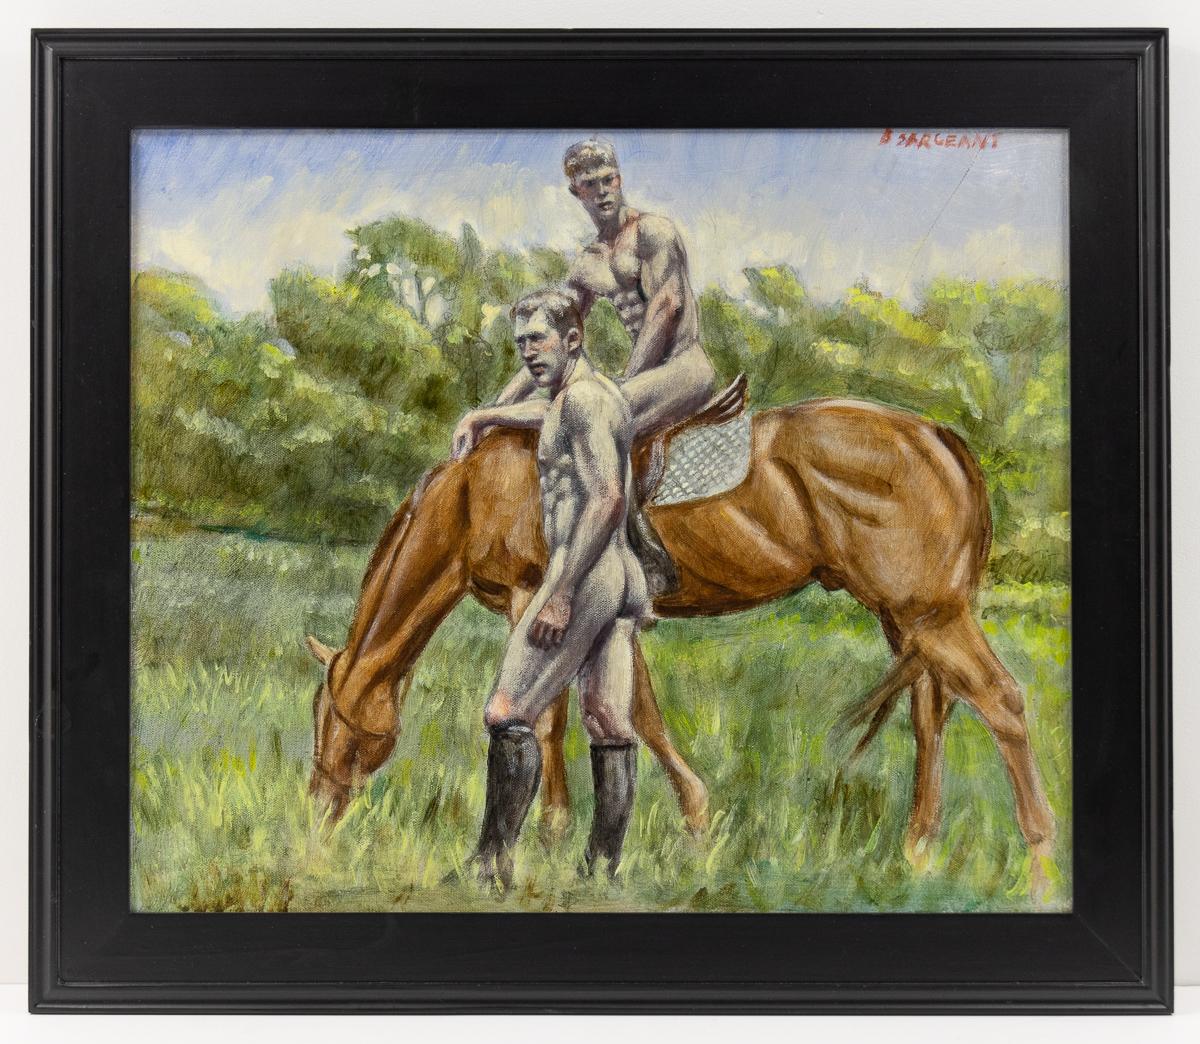 [Bruce Sargeant (1898-1938)] Two Men with Horse - Painting by Mark Beard